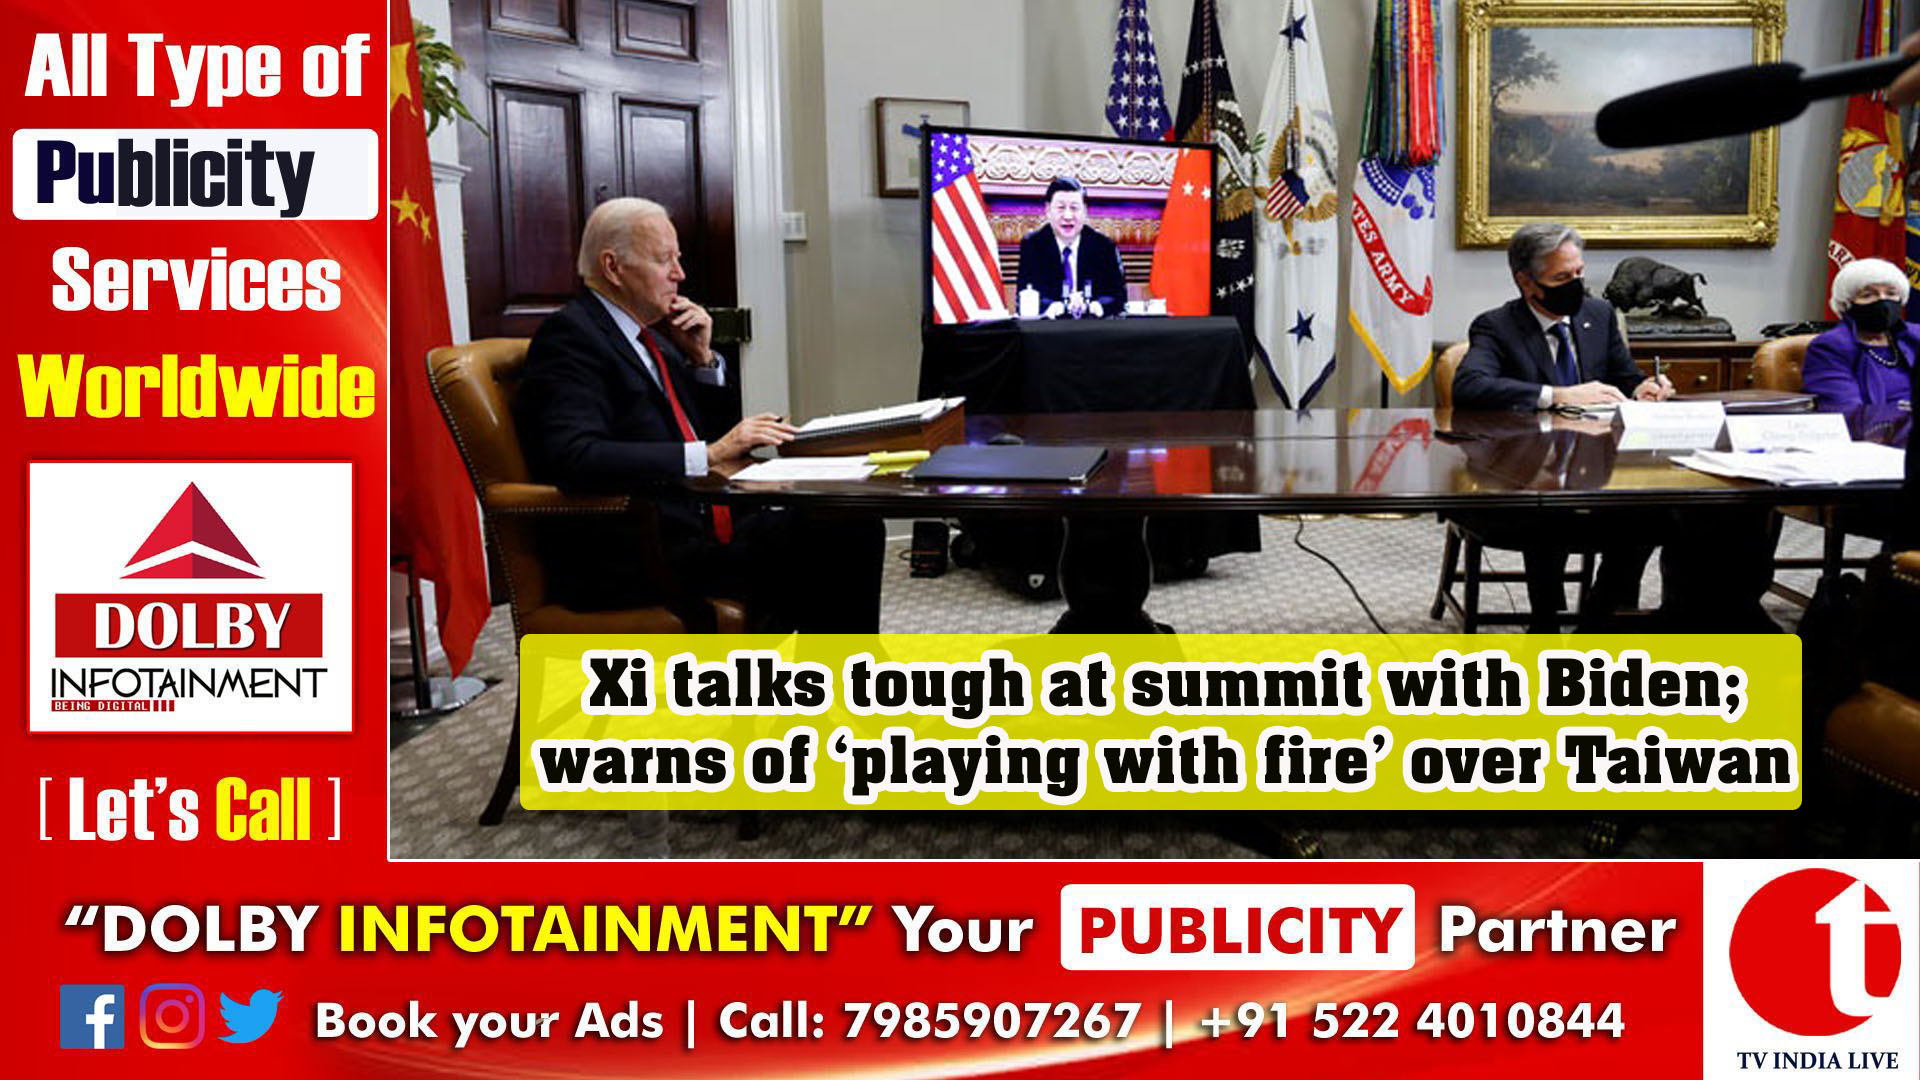 Xi talks tough at summit with Biden; warns of ‘playing with fire’ over Taiwan